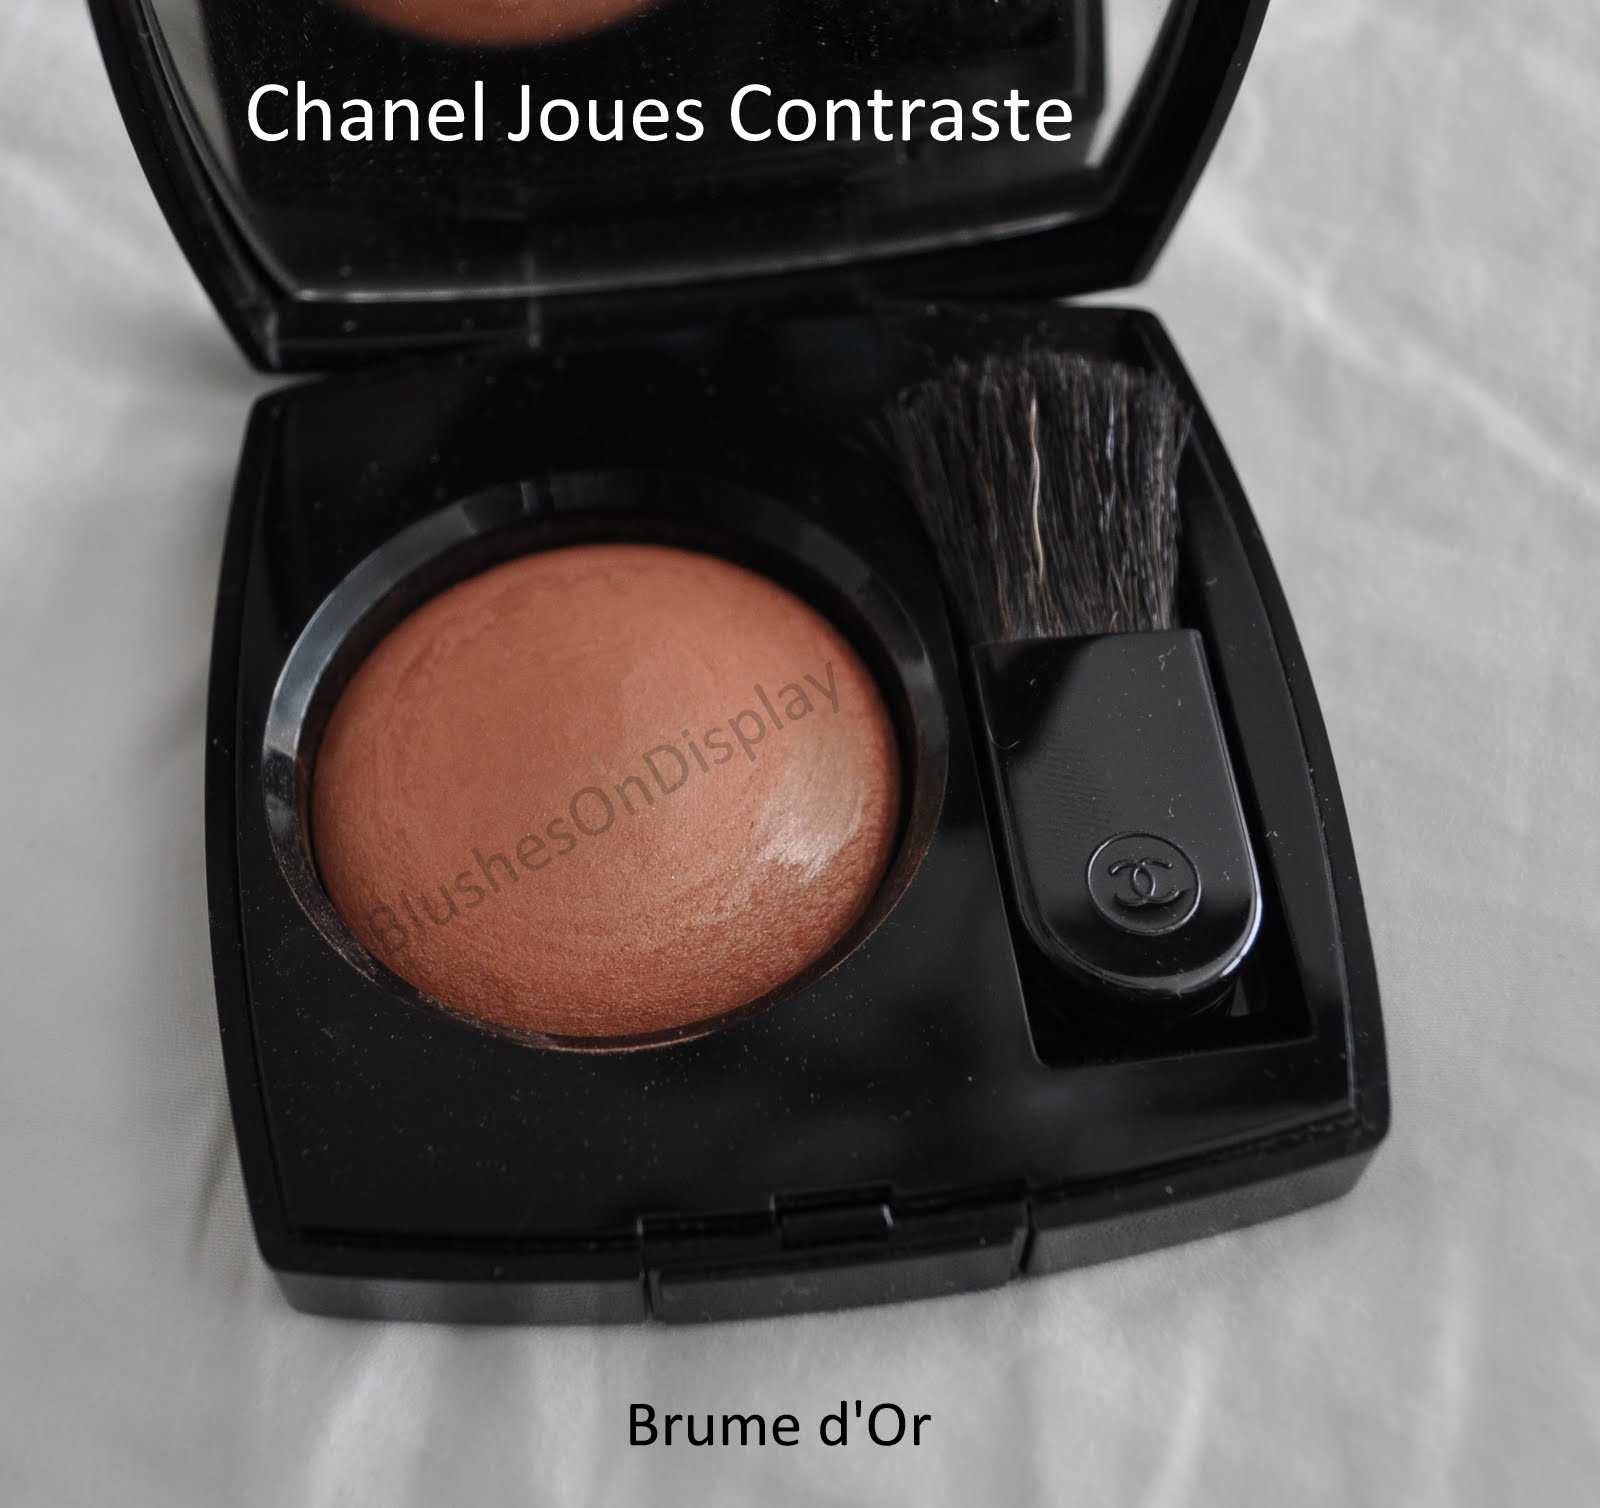 on Display: Chanel Joues Contraste